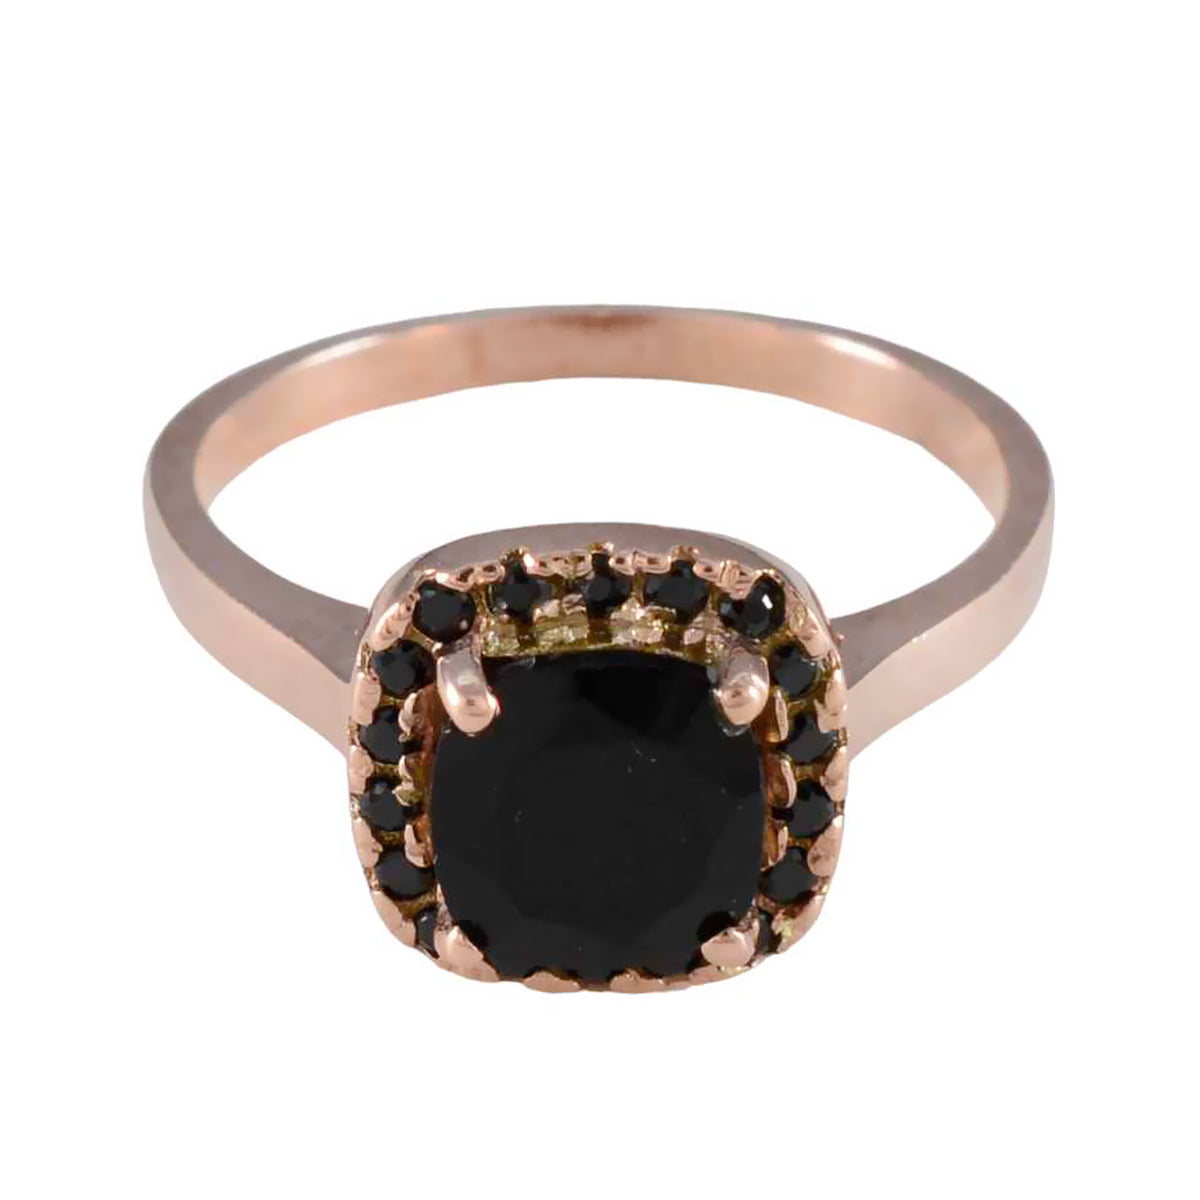 Riyo Superb Silver Ring With Rose Gold Plating Black Onyx Stone Cushion Shape Prong Setting Custom Jewelry Cocktail Ring